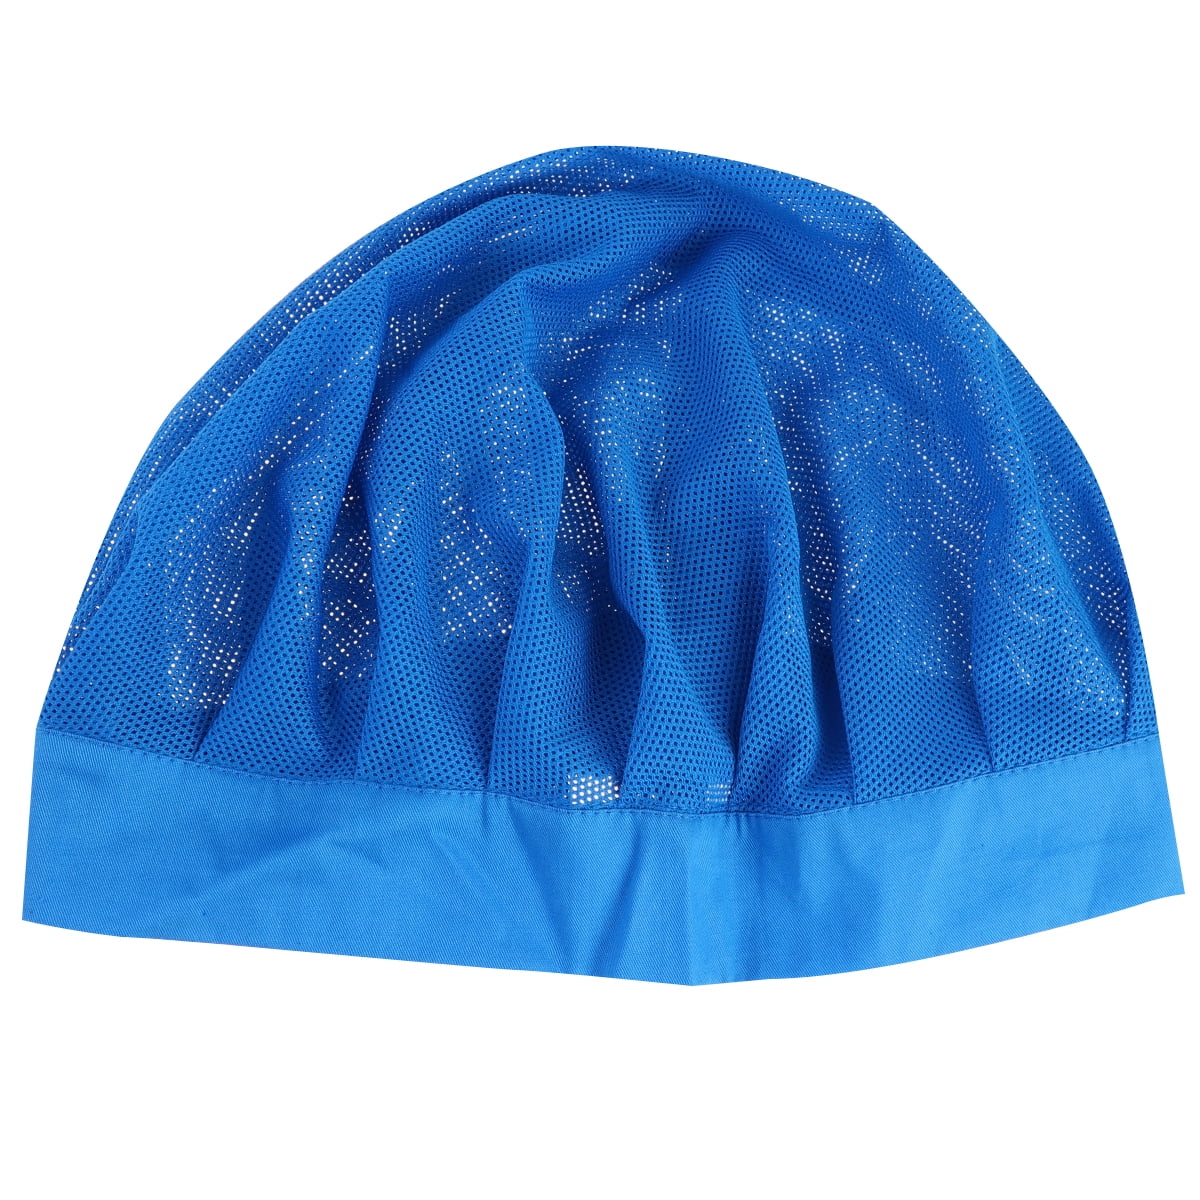 Exquisite Cotton Hat Useful Prevent Hair Loss Breathable Head Protector for  Home Daily Use (Wide-brimmed and Elastic, Blue) 